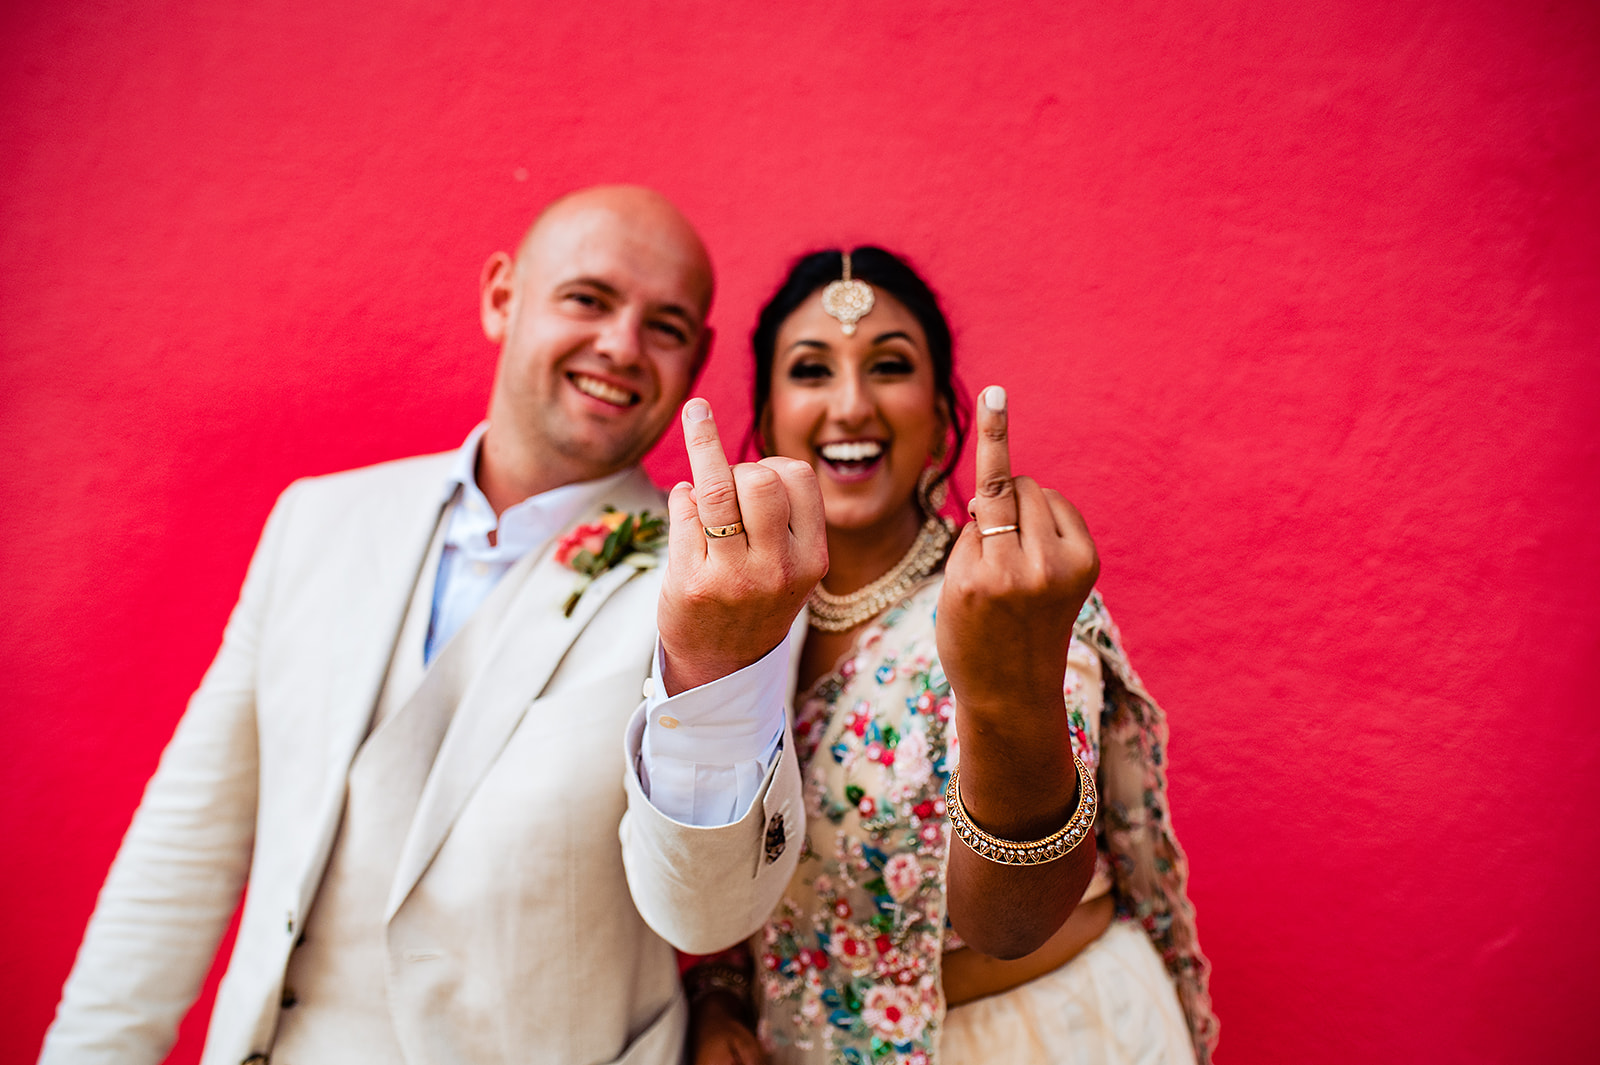 The bride and groom stand against a super bright crimson wall, holding up their ring fingers as if they're flipping the bird. Ollie, the groom, is wearing a cream linen suit with no tie, and a bright orange contrasted button hole flower. Krishna, the bride, is adorned in traditional Hindu attire with bright, colourful flowers embroidered on. They're both smiling from ear to ear.